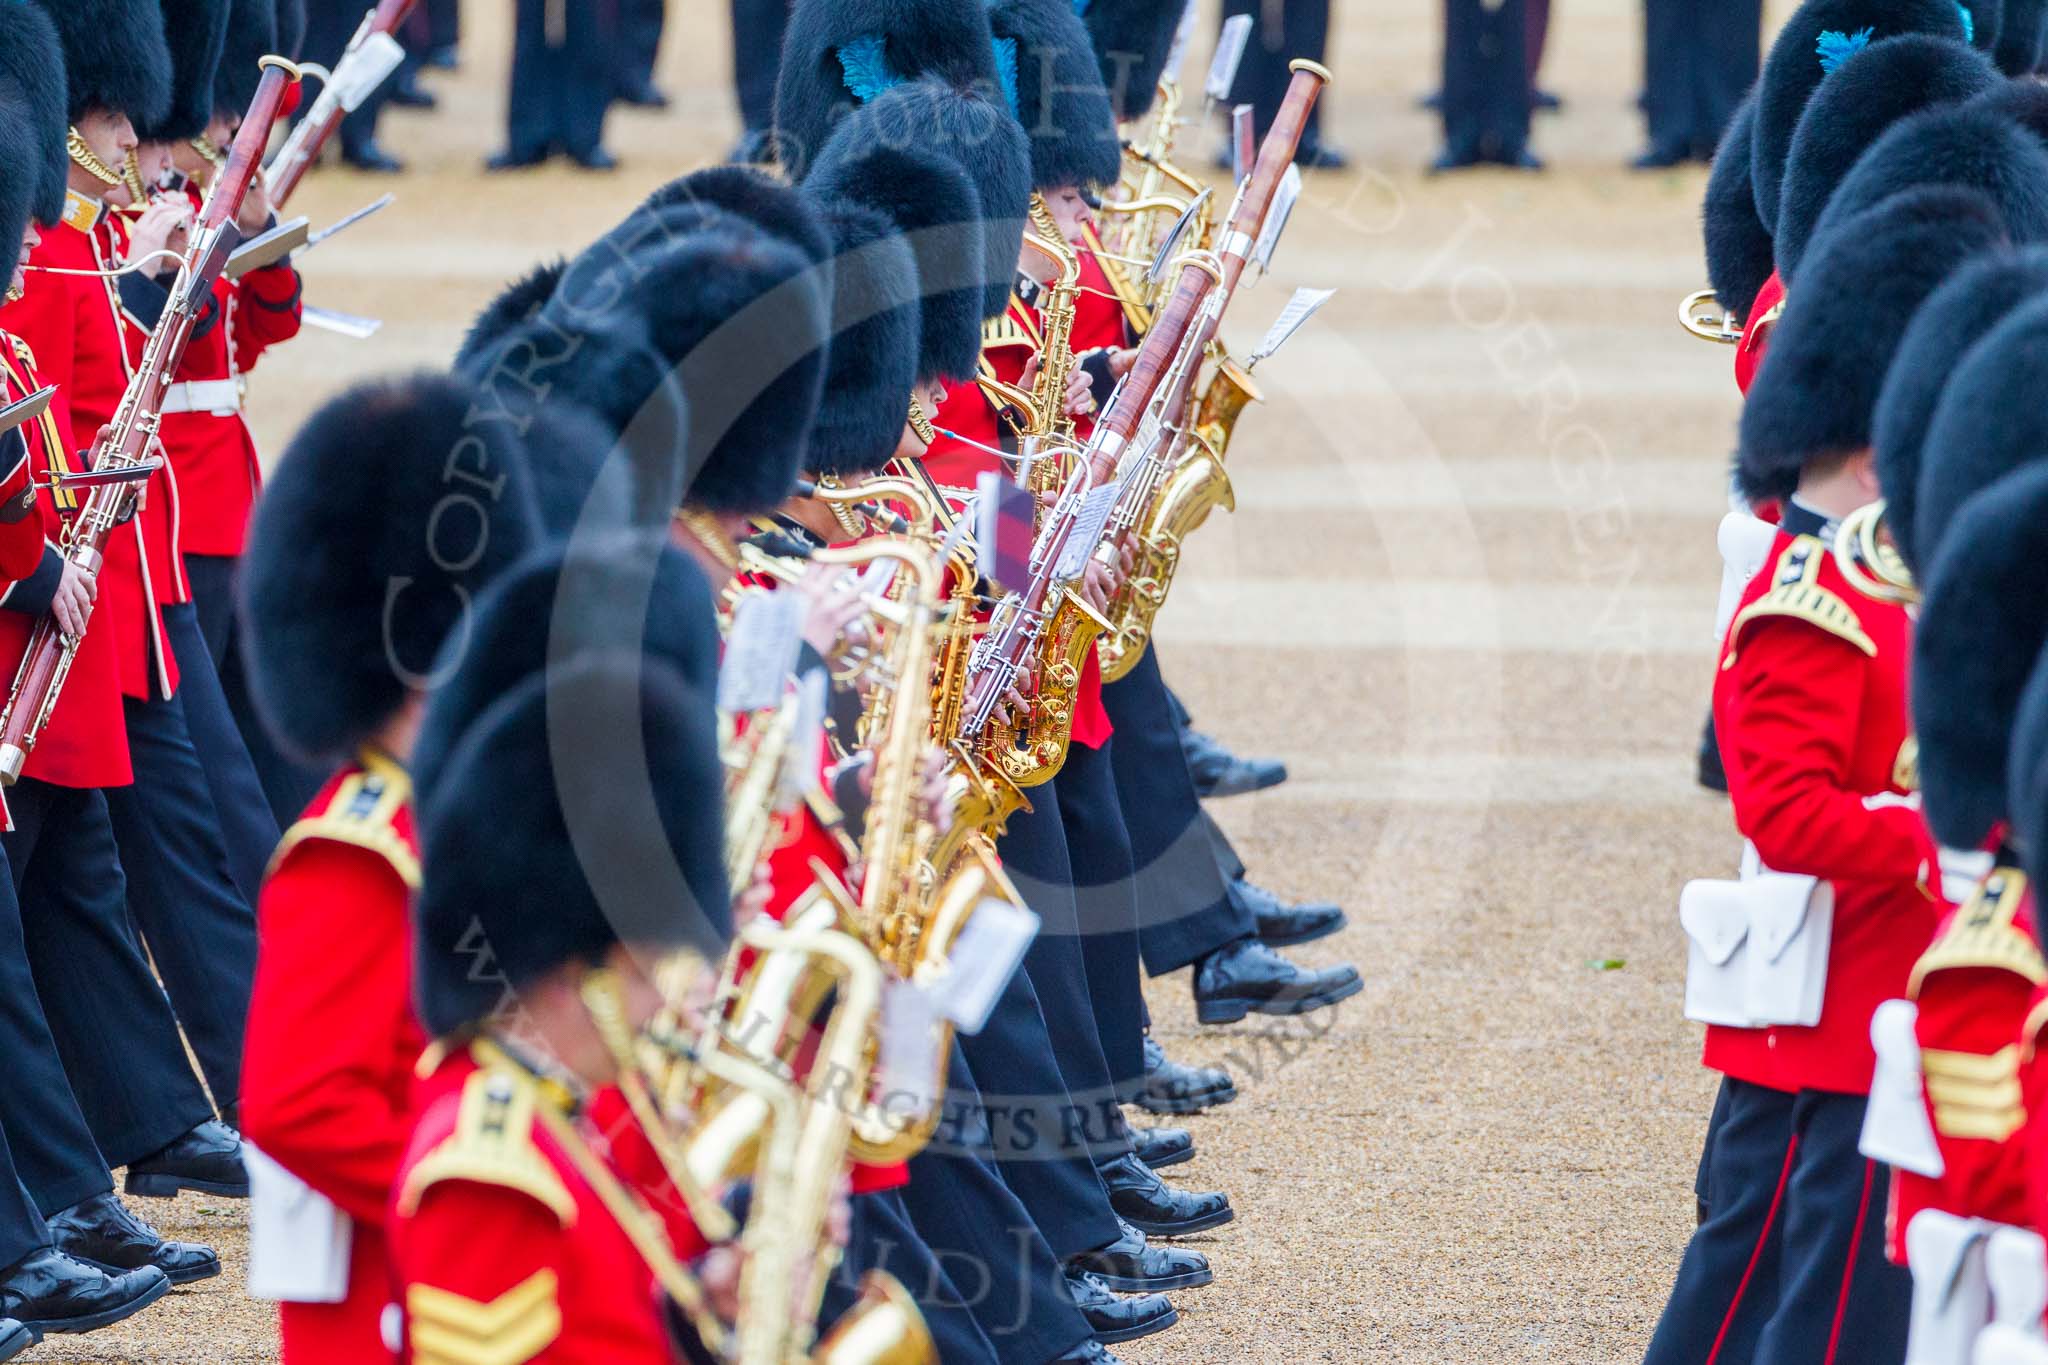 Trooping the Colour 2015. Image #334, 13 June 2015 11:08 Horse Guards Parade, London, UK